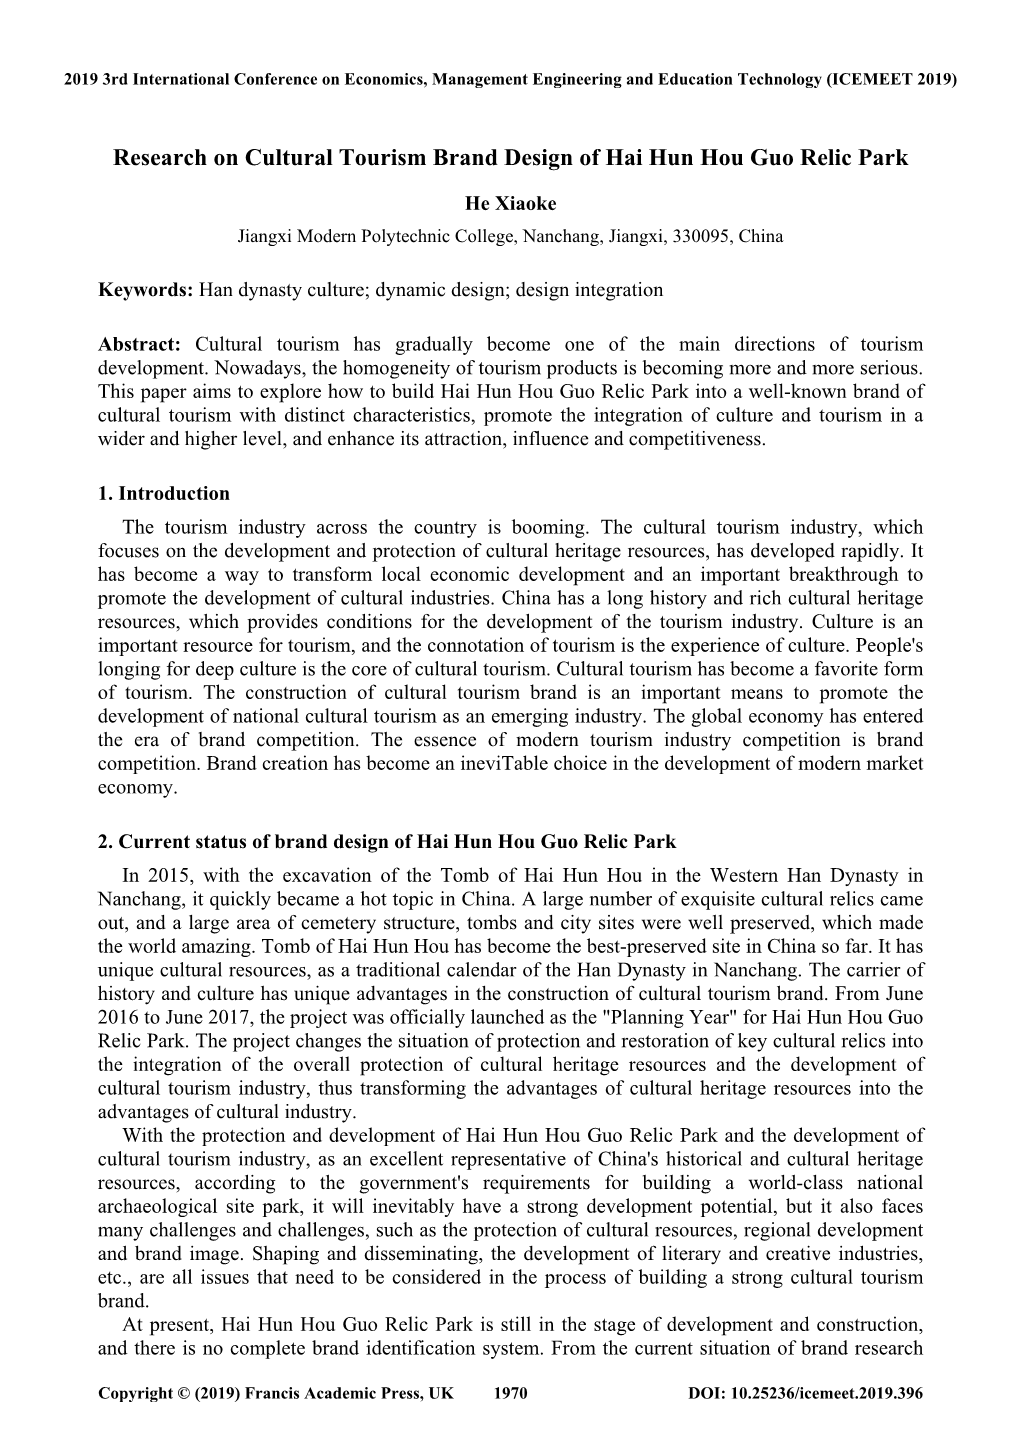 Research on Cultural Tourism Brand Design of Hai Hun Hou Guo Relic Park